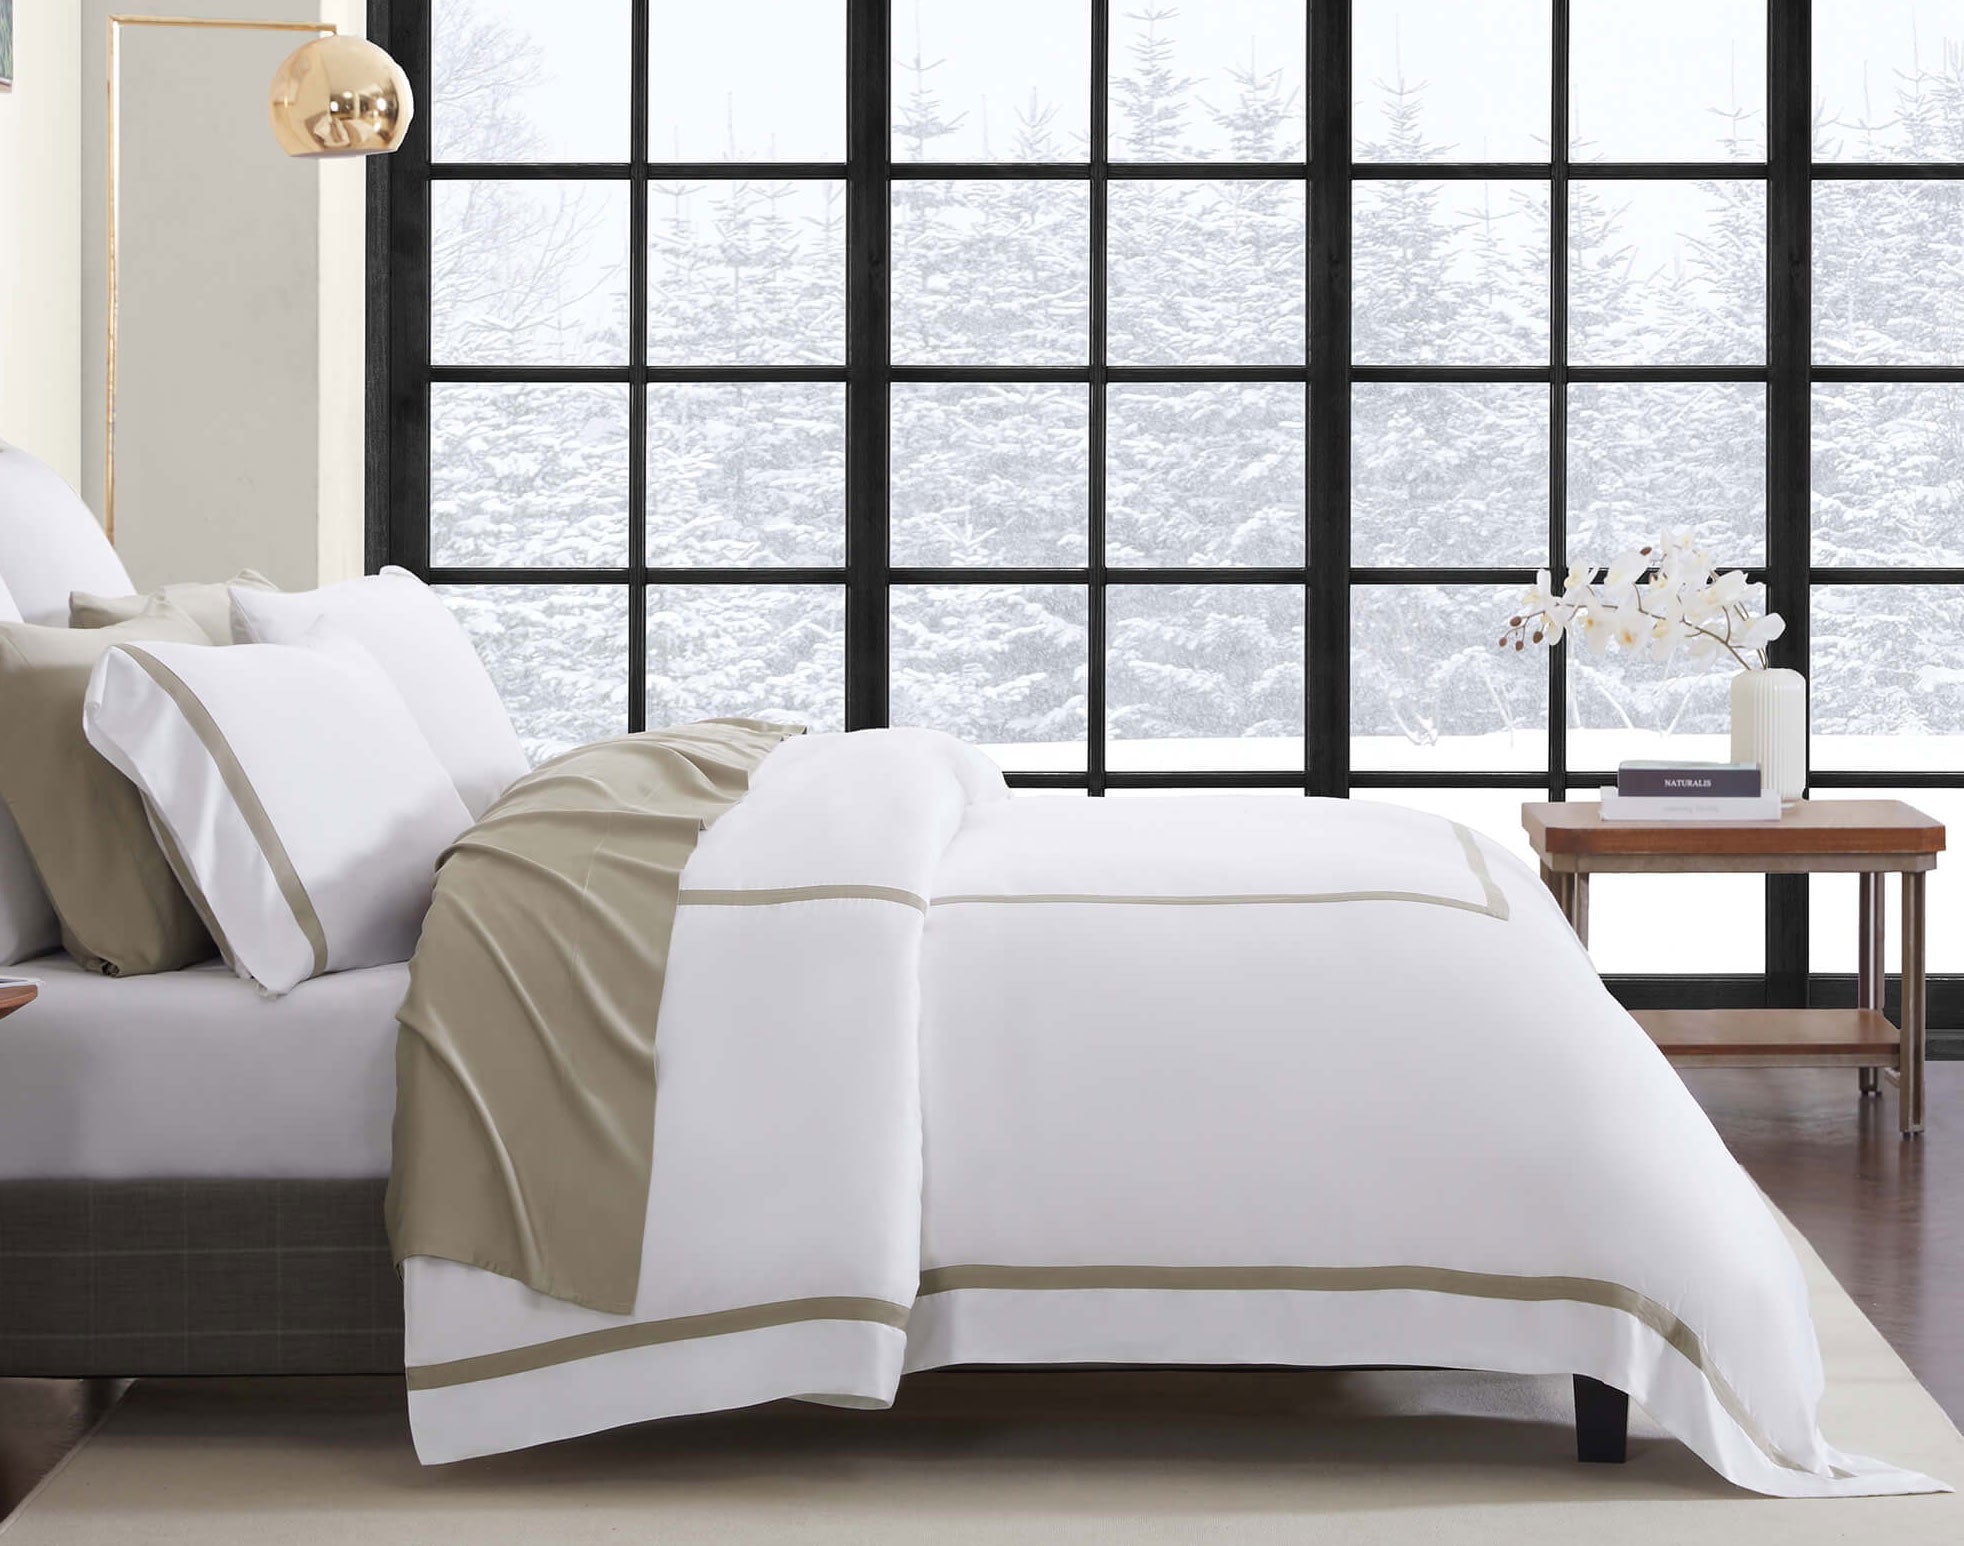 The Benefits of Using a Down Comforter in the Winter